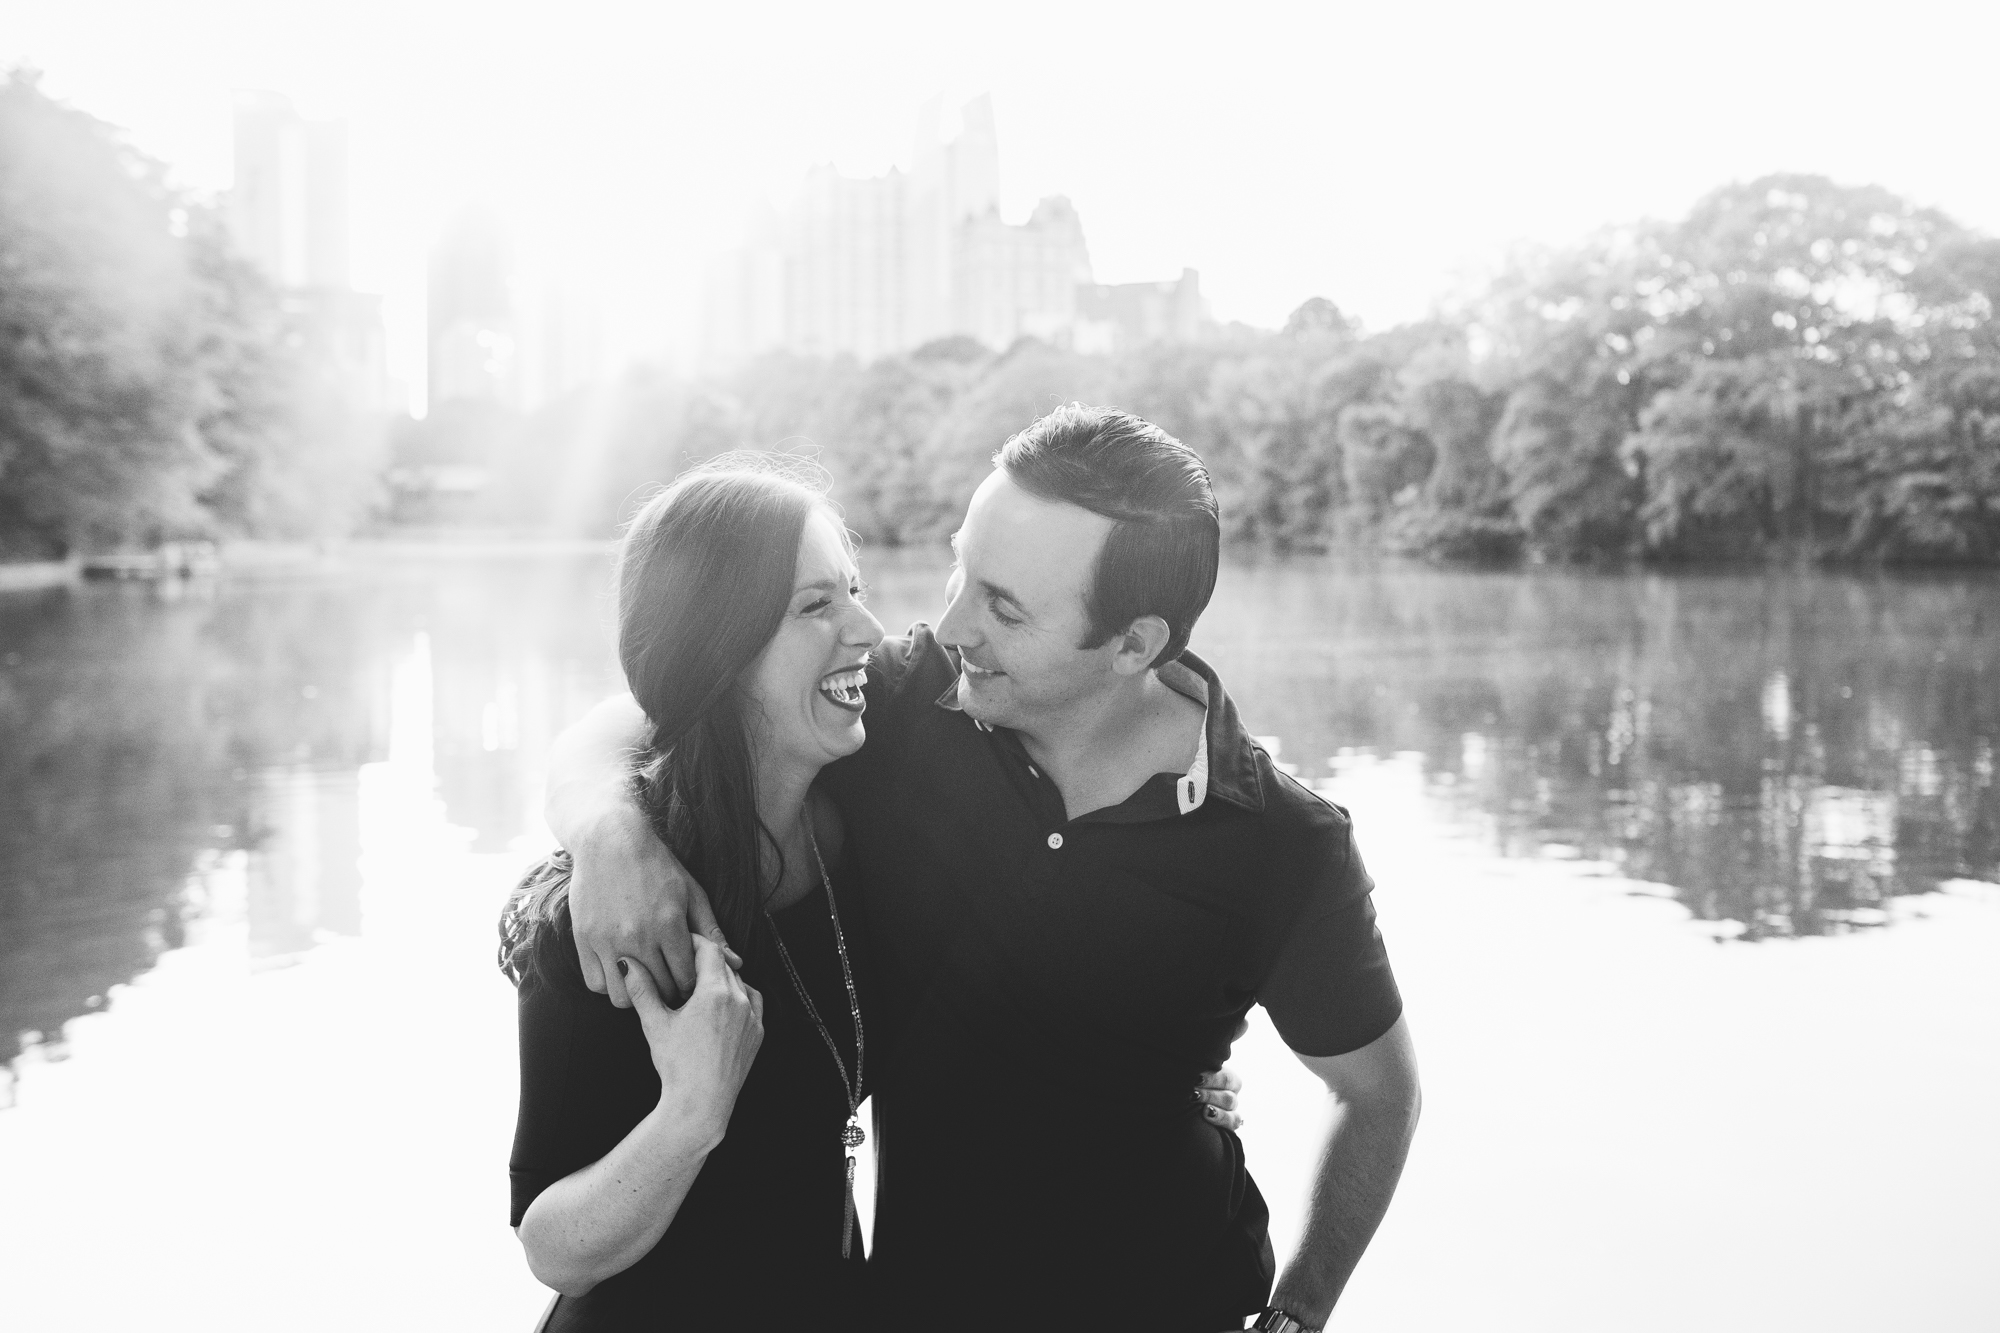 Between the lake and skyline, Piedmont park is a beautiful option for engagement pictures.